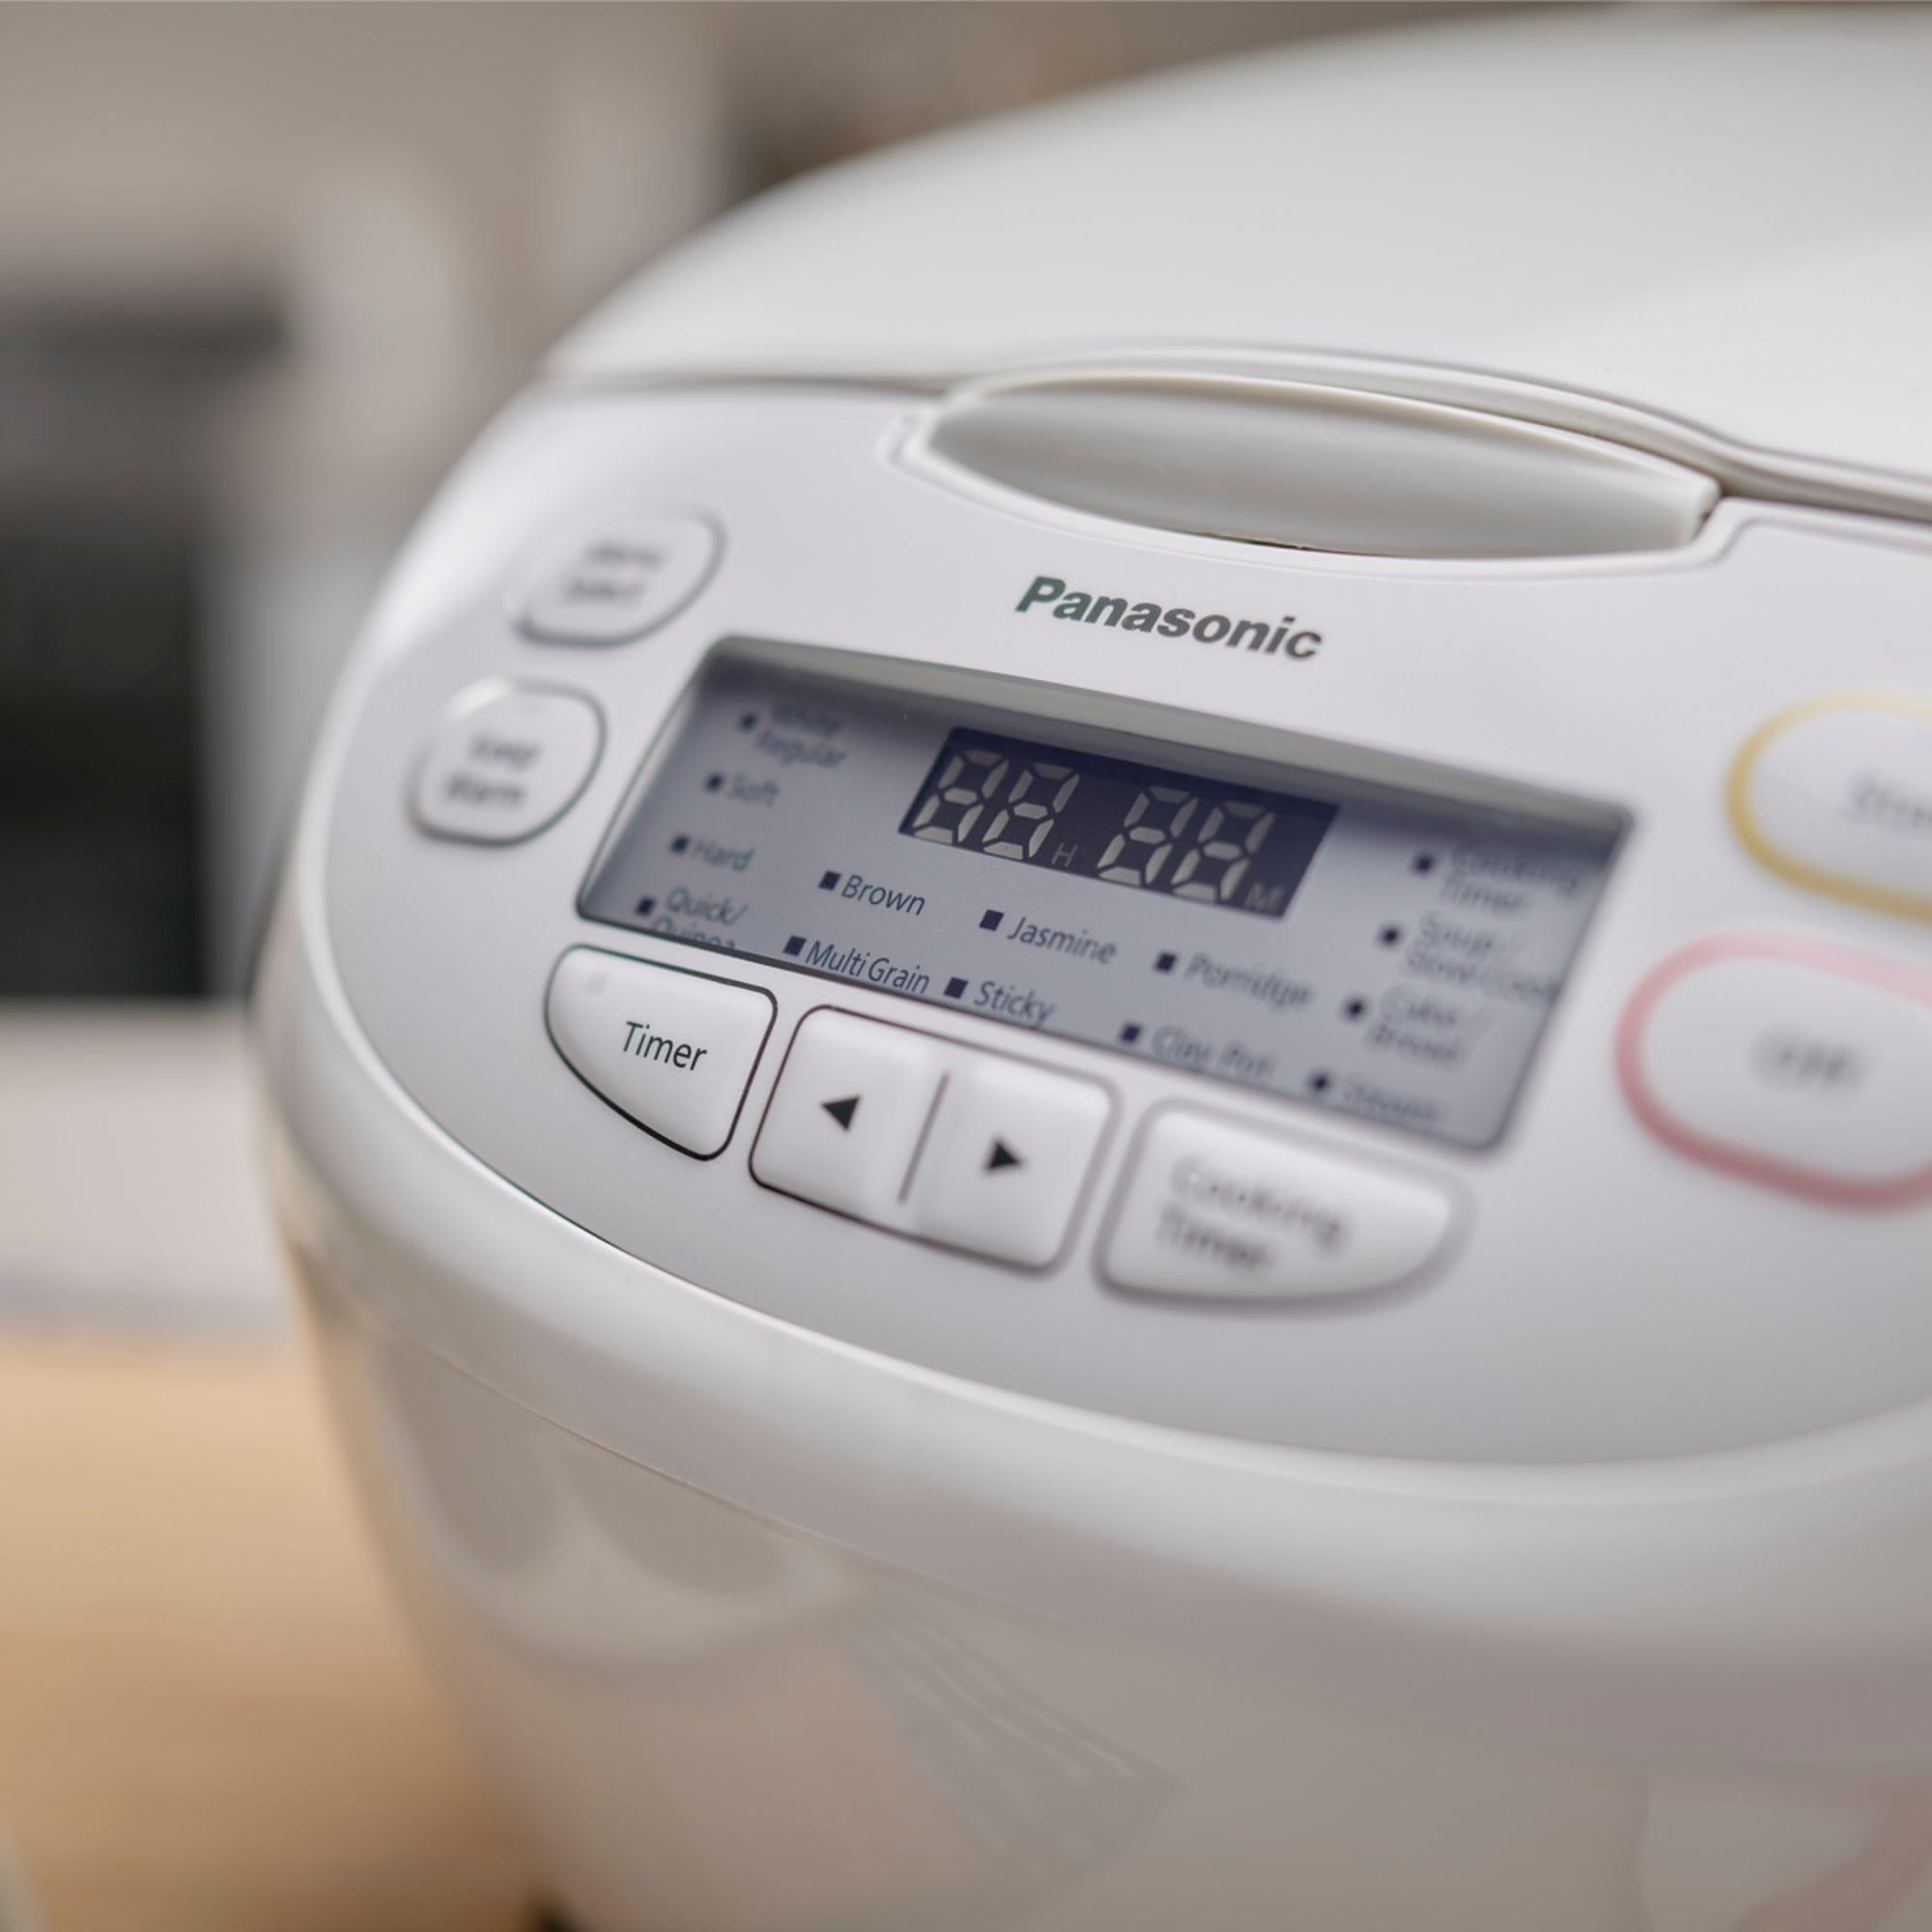 Panasonic Multi Function Rice Cooker 10 Cup White Image 5